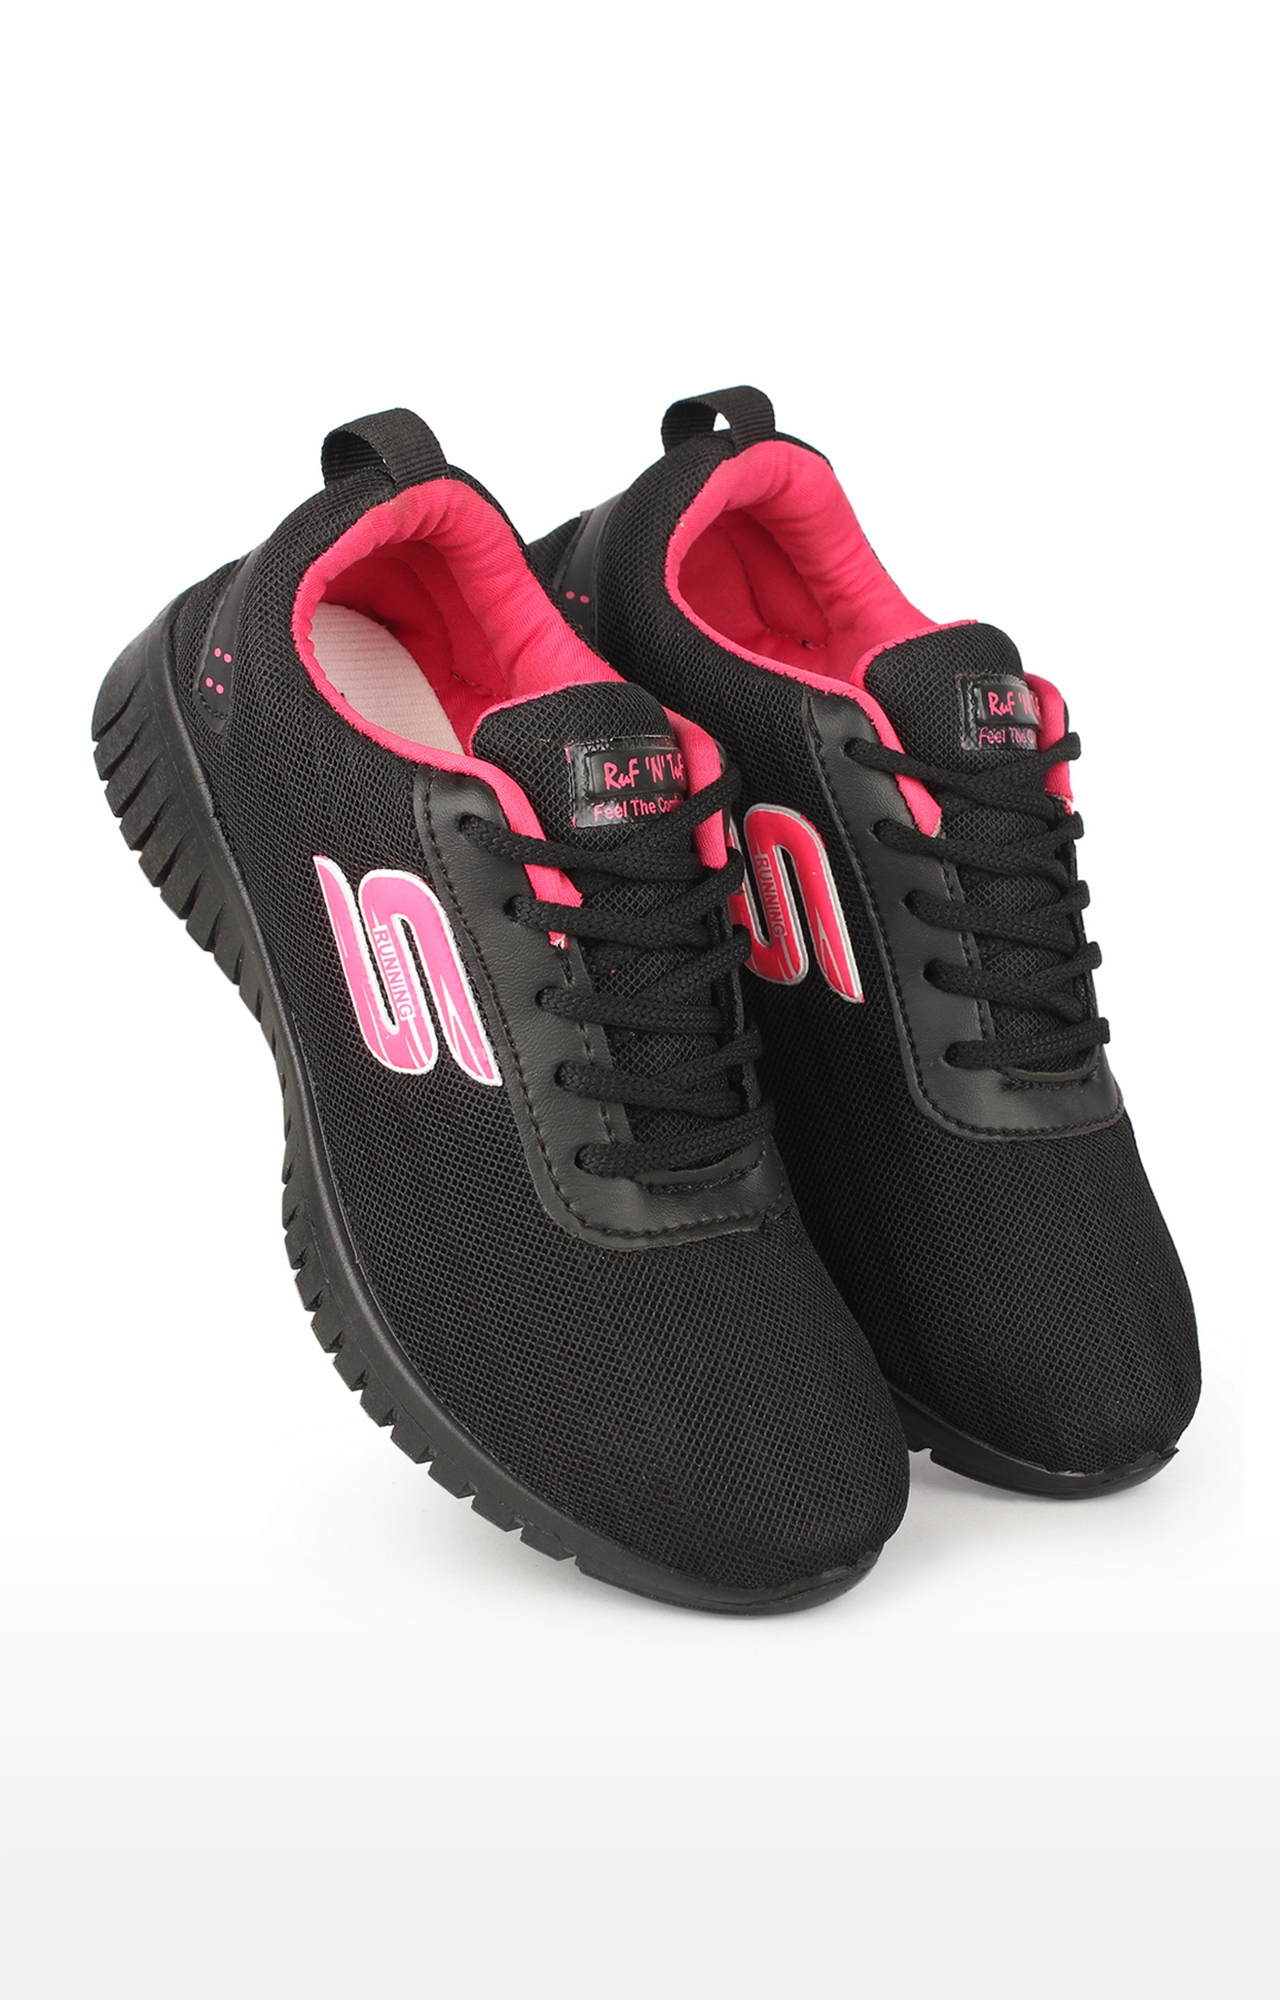 RNT Sketch 01 Black and Pink Shoes for Women